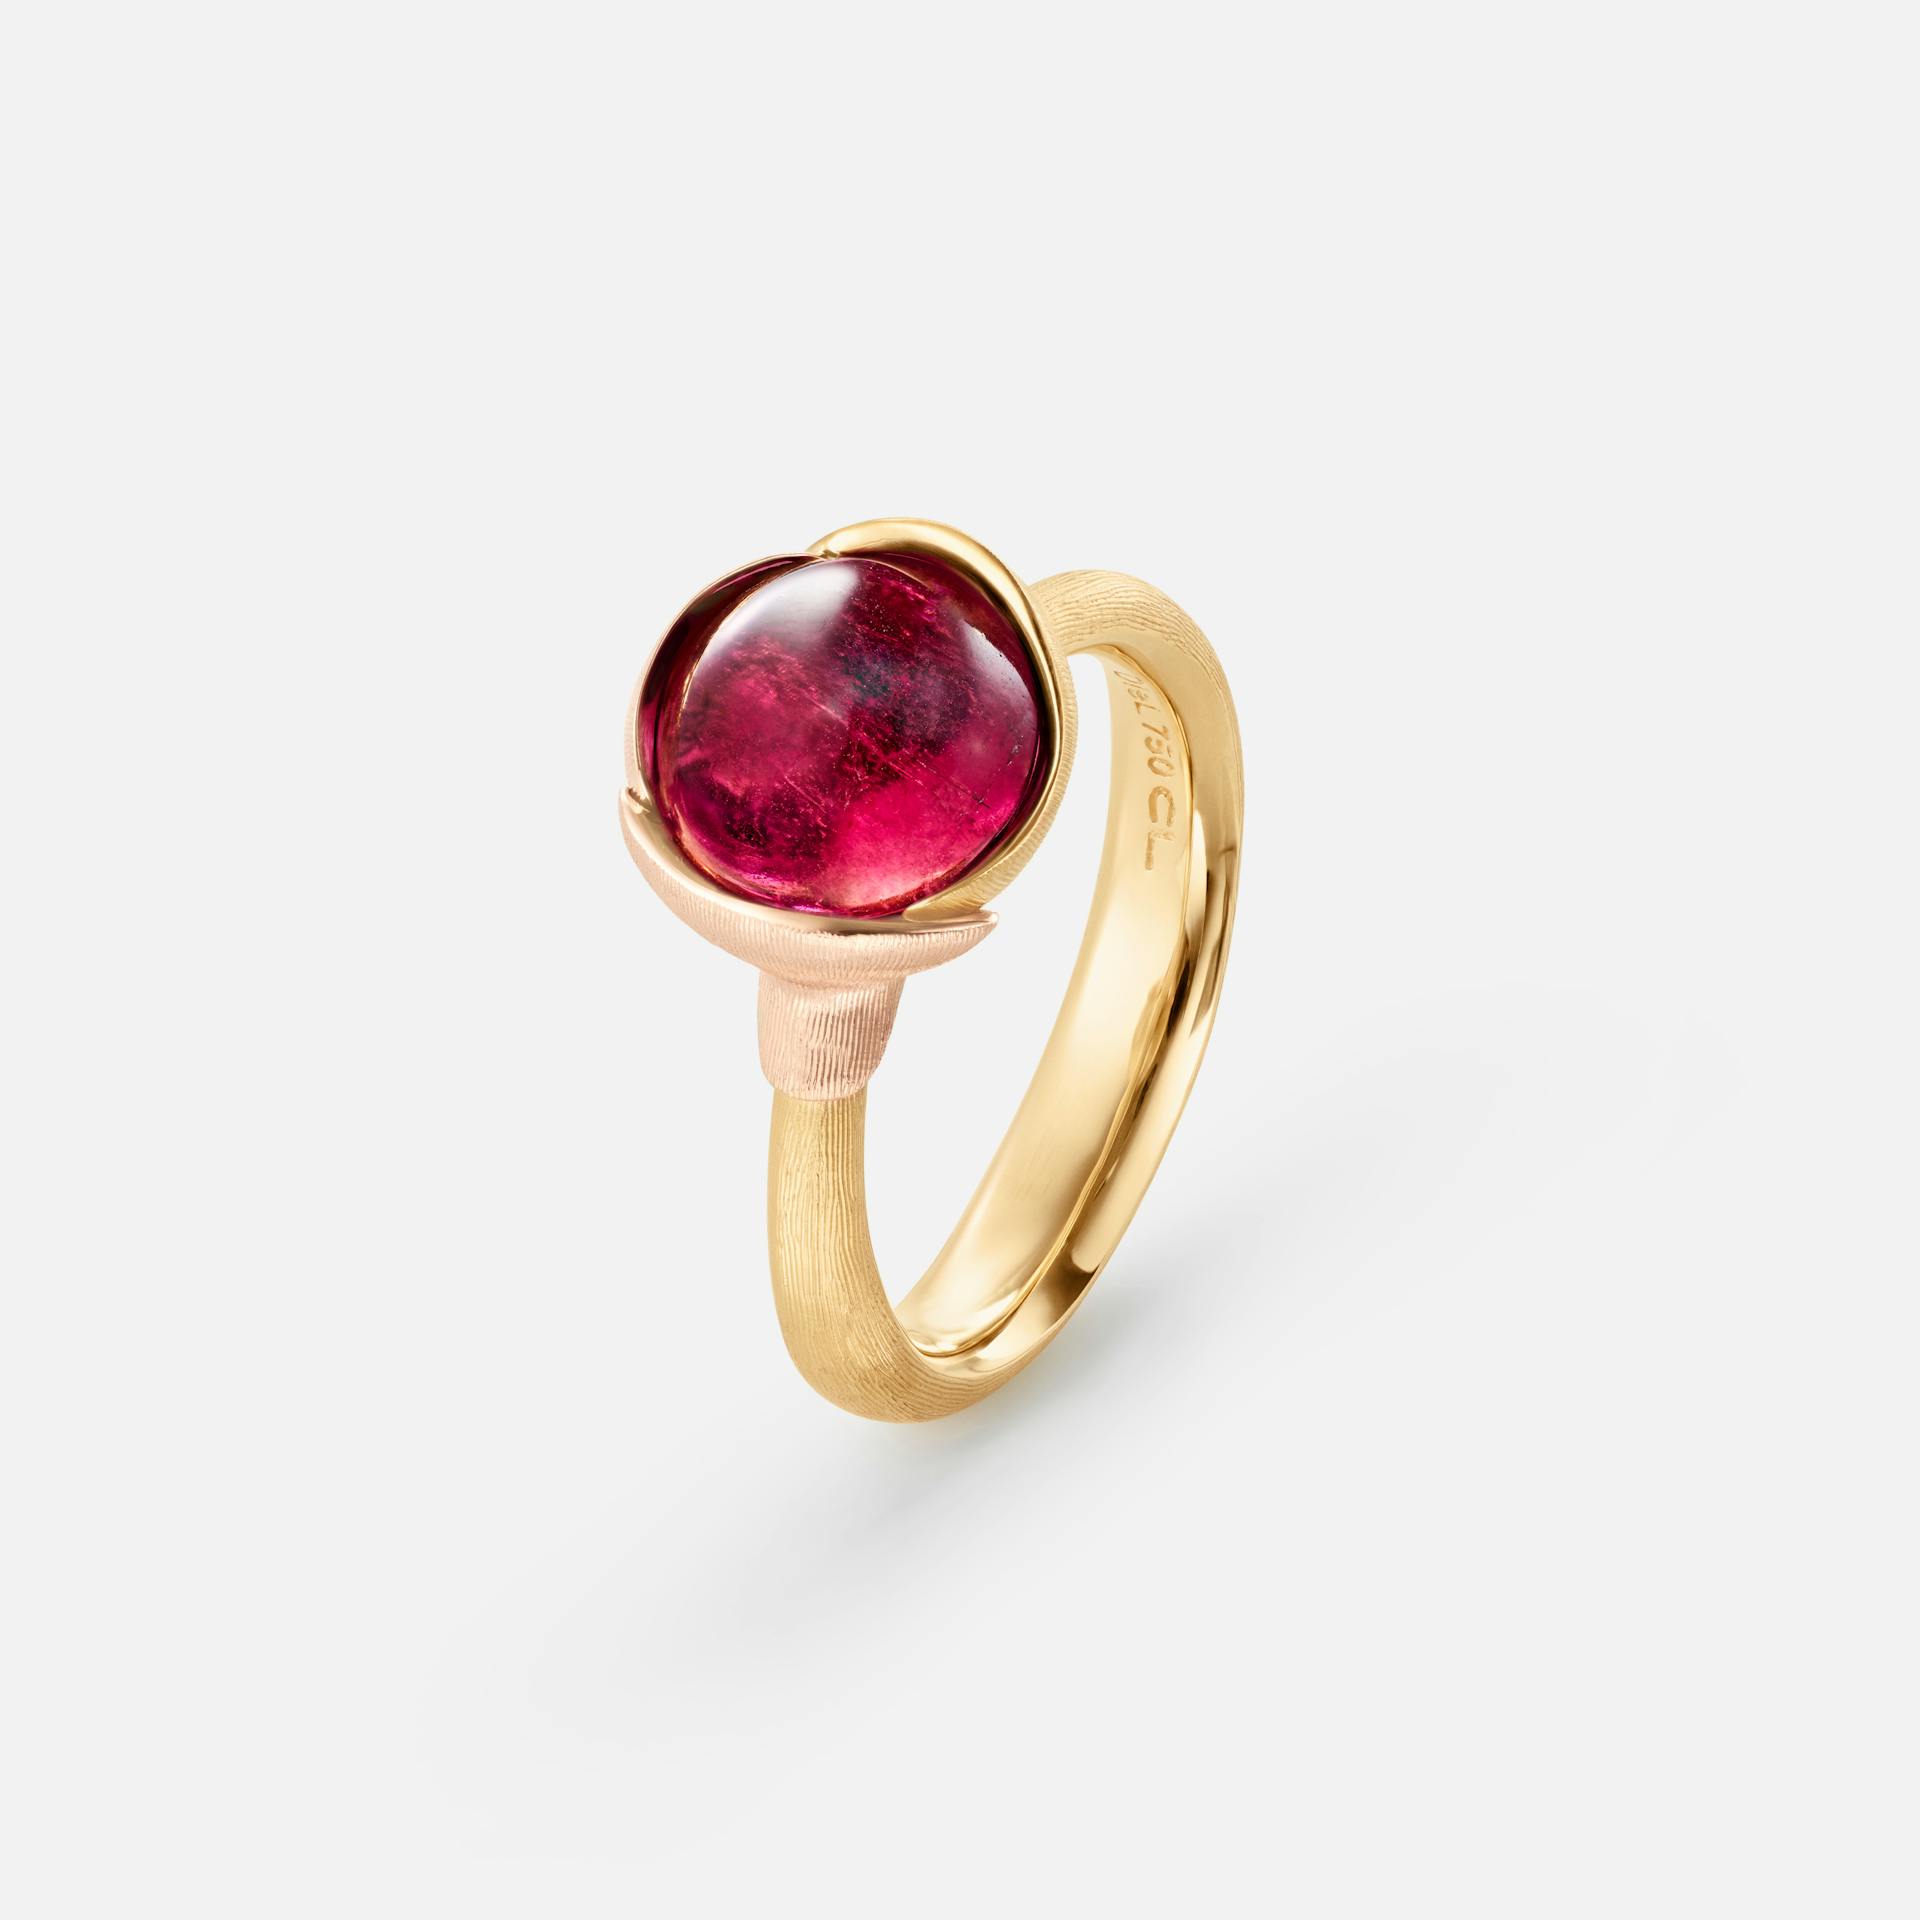 Lotus Ring size 1 in Yellow and Rose Gold  with Cerise Tourmaline  |  Ole Lynggaard Copenhagen